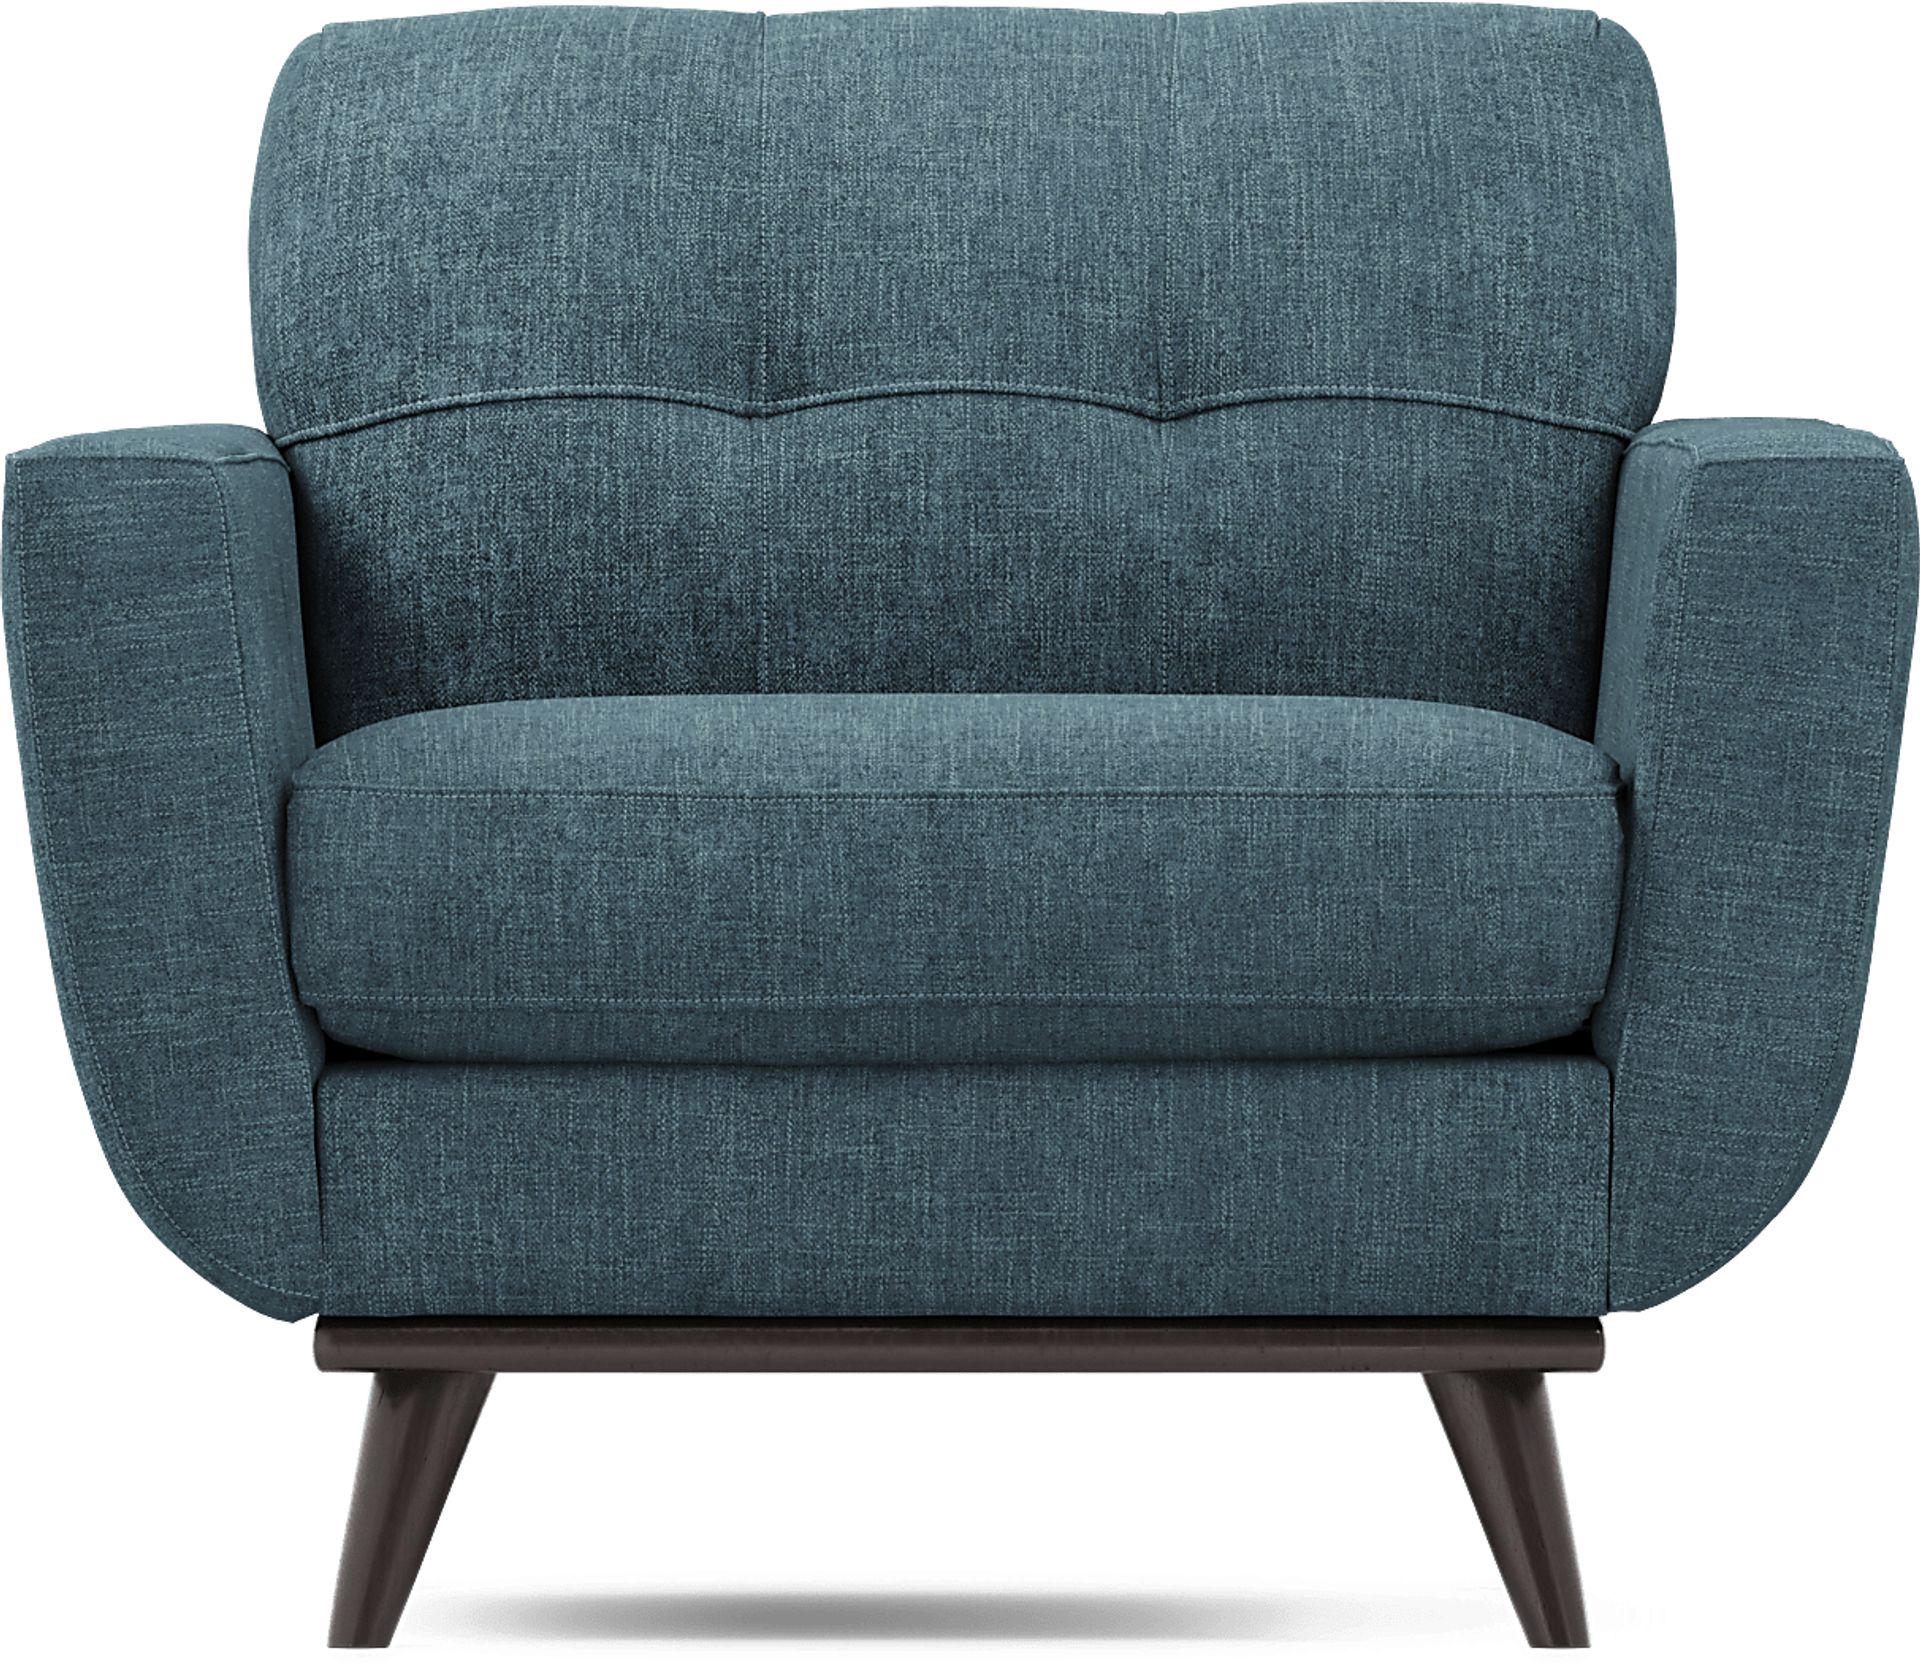 East Side Teal Blue,Green Chenille Fabric Chair | Rooms to Go